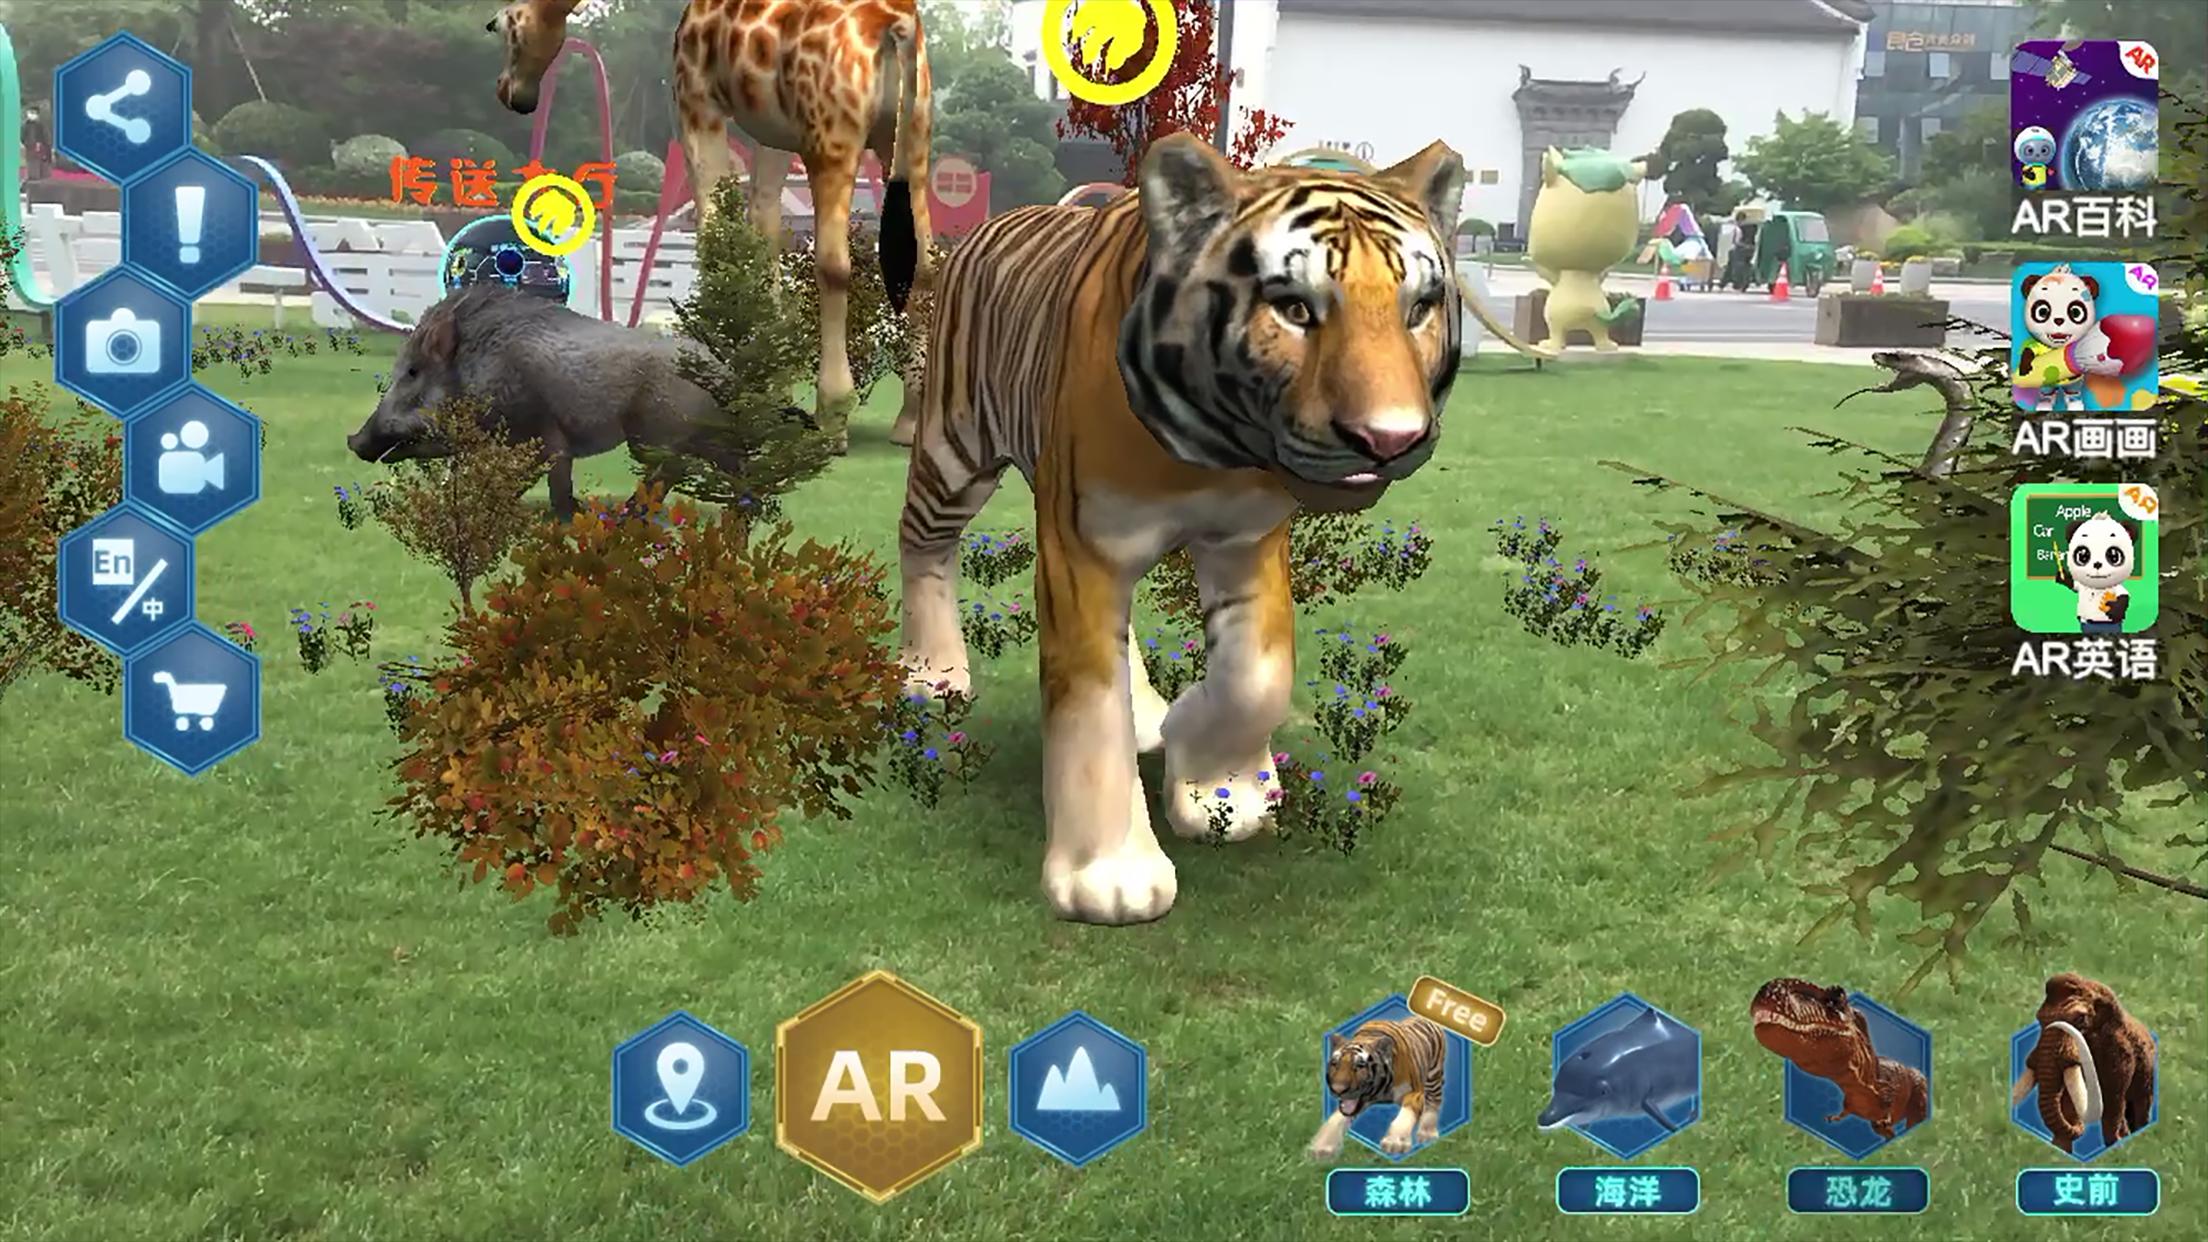 Ar Dinosaur Zoo For Kids Learning Games For Android Apk Download - roblox dinosaur zoo games